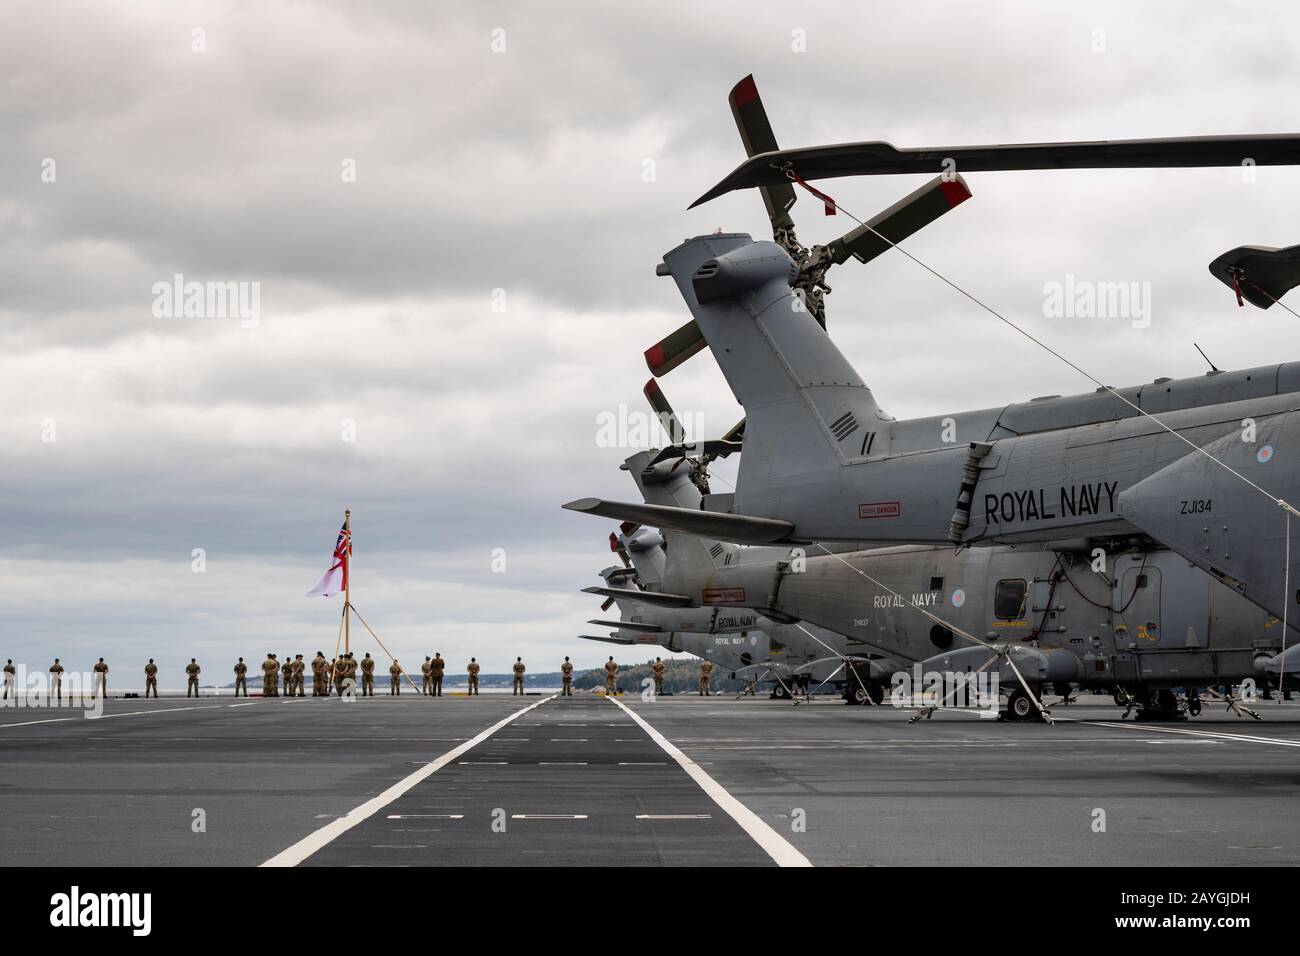 The tails of lined up Royal Navy Merlin helicopters aboard the carrier HMS QUEEN ELIZABETH with Royal Marines lining the rail in the background. Stock Photo